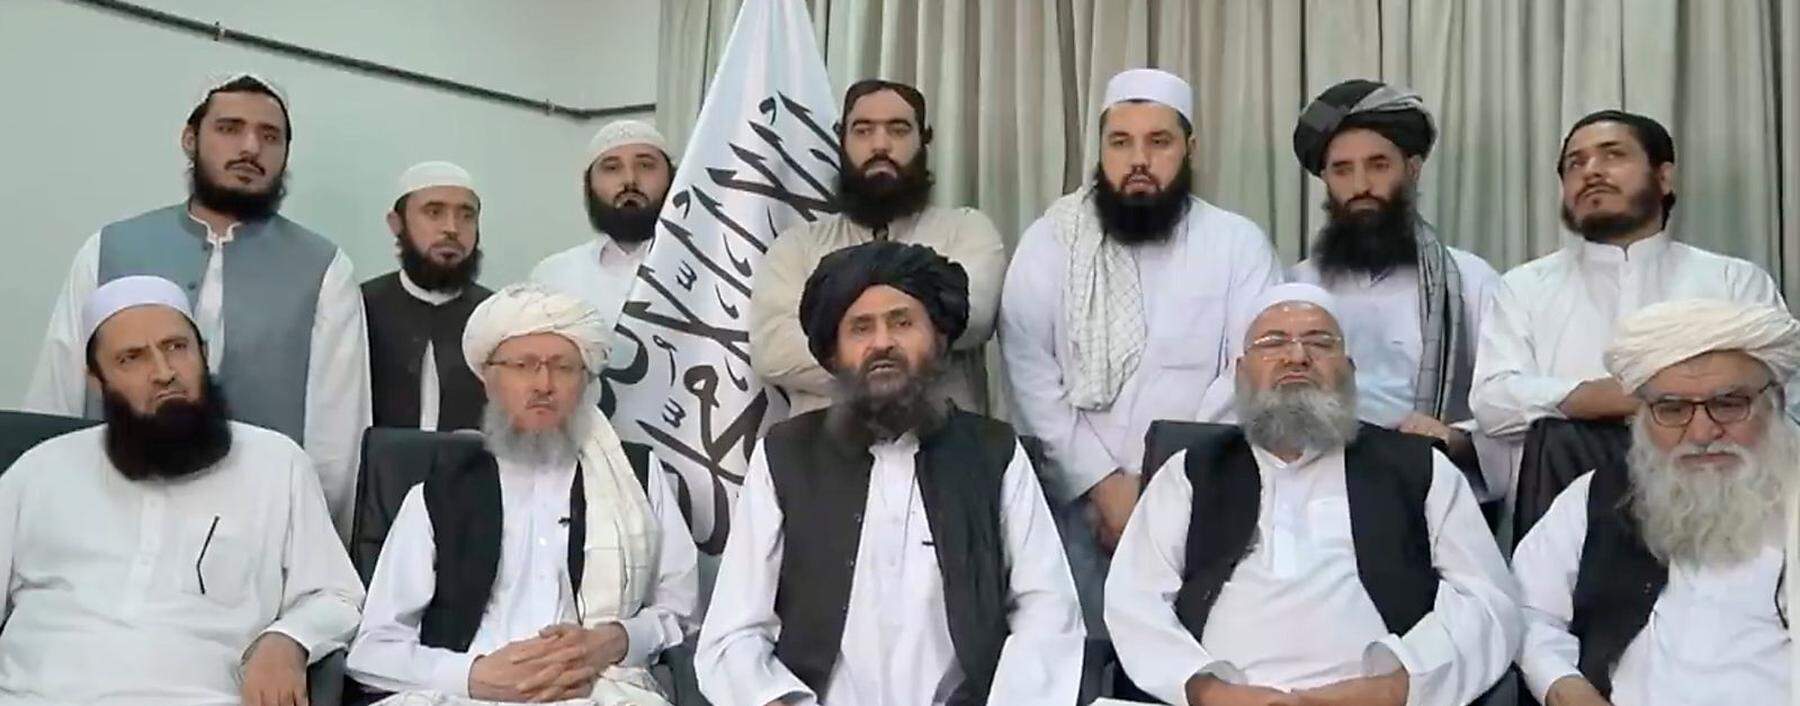 A still image taken from video shows Mullah Baradar Akhund, a senior official of the Taliban, making a video statement